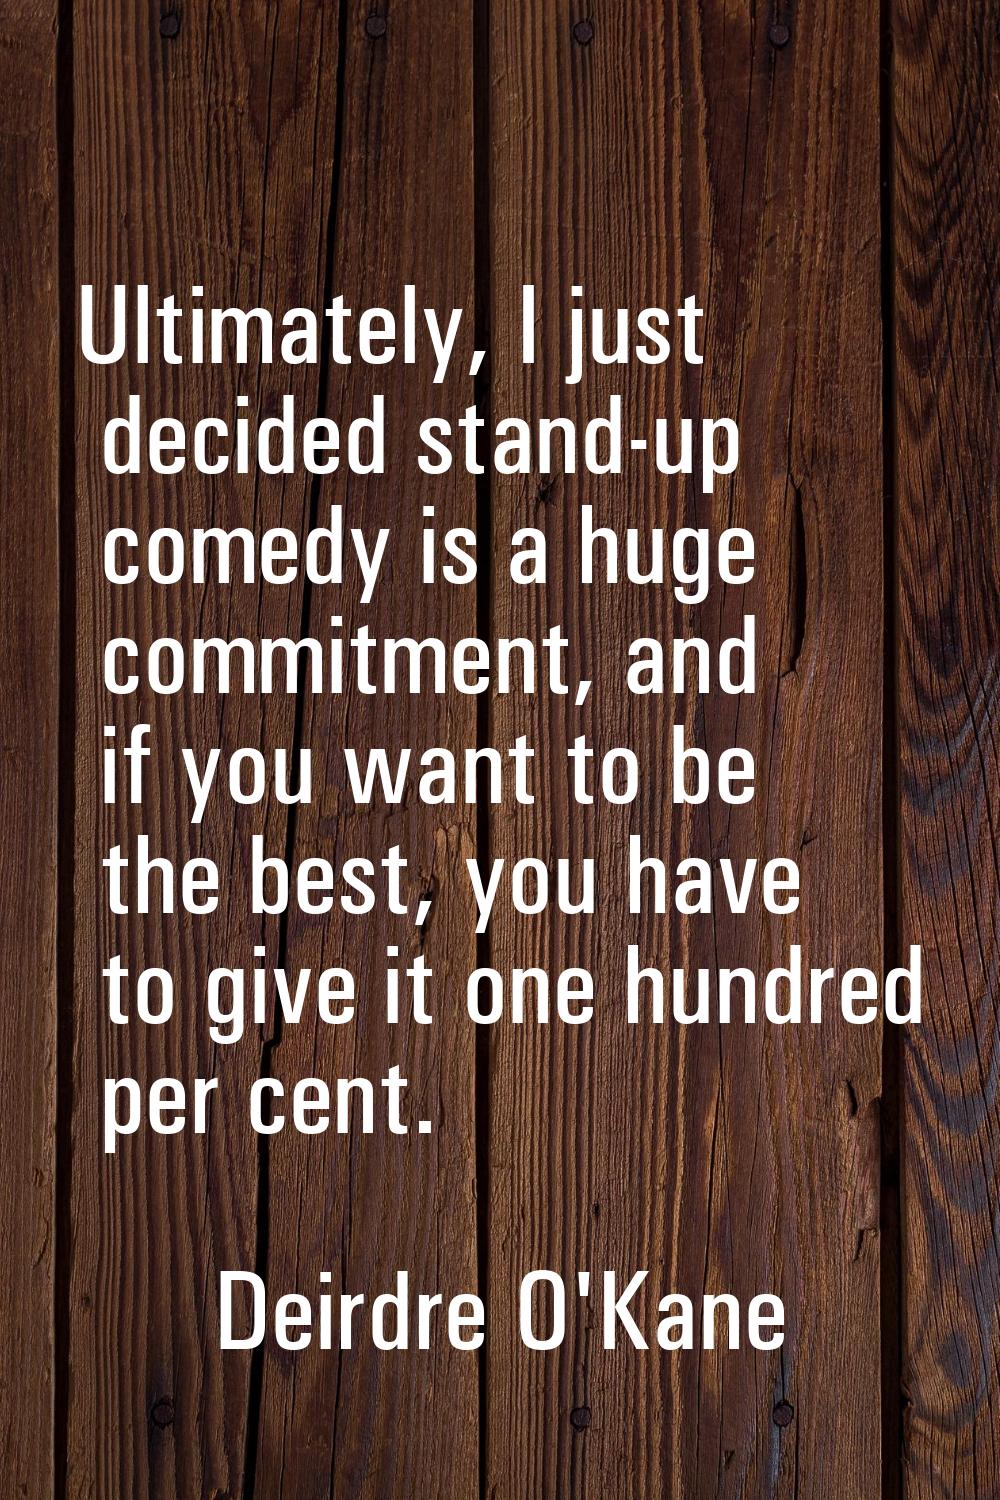 Ultimately, I just decided stand-up comedy is a huge commitment, and if you want to be the best, yo